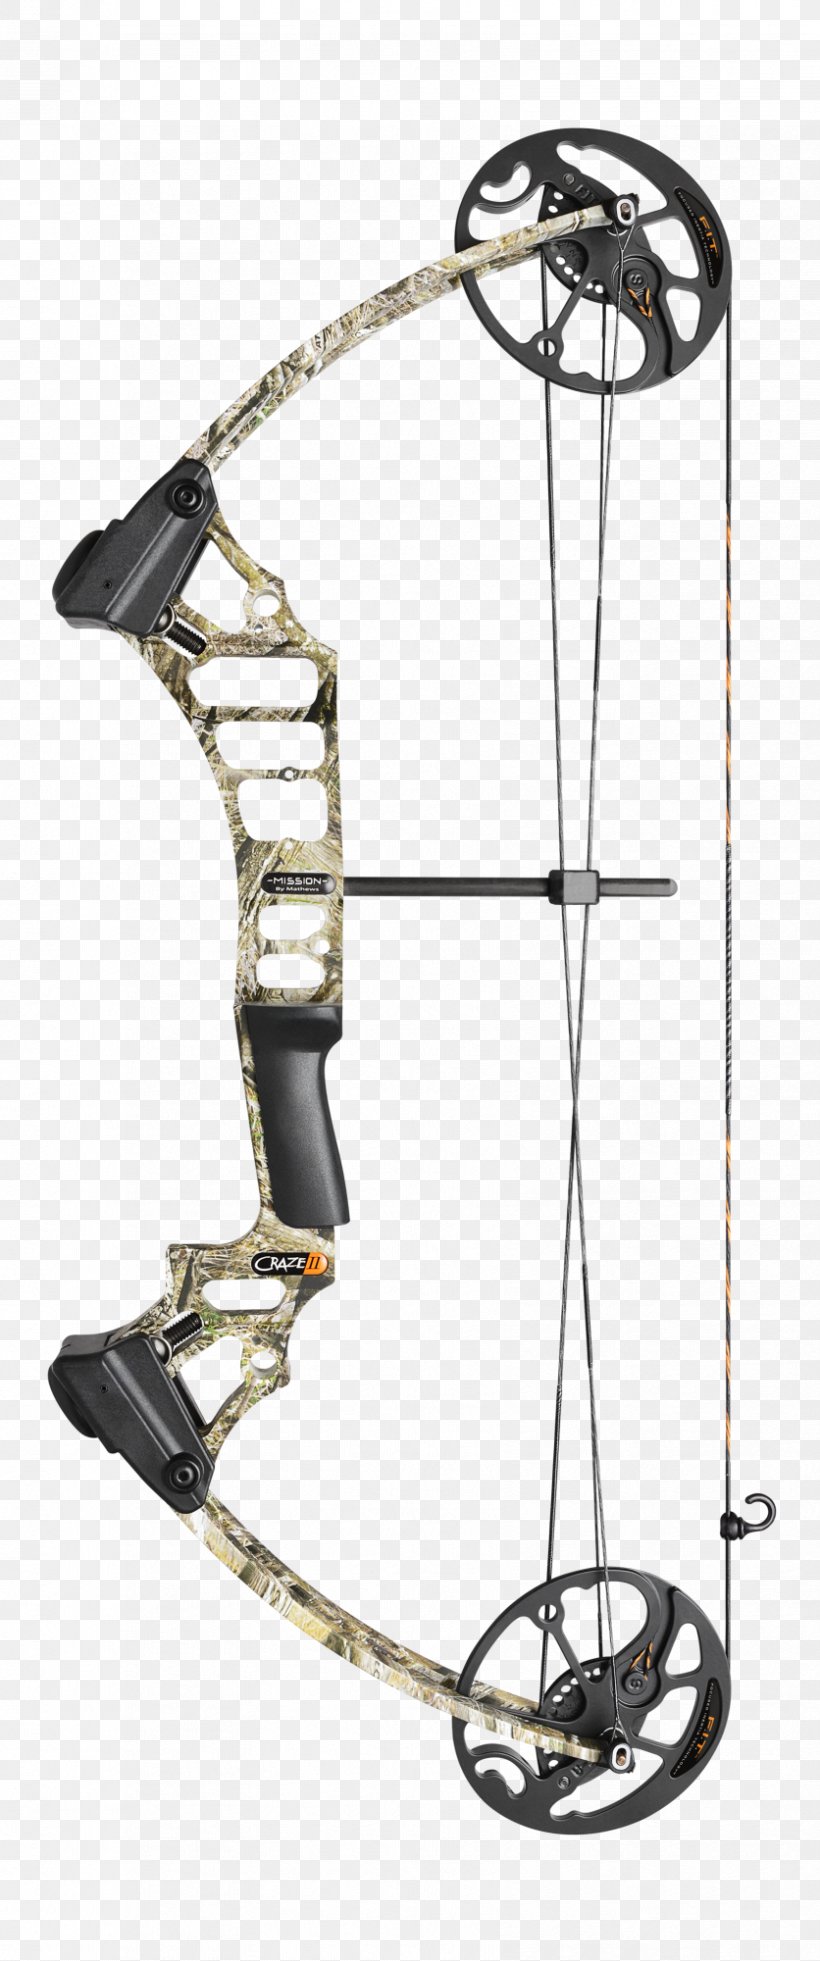 Archery Bow And Arrow Compound Bows Bowhunting, PNG, 836x2000px, Archery, Bow, Bow And Arrow, Bowhunting, Compound Bow Download Free